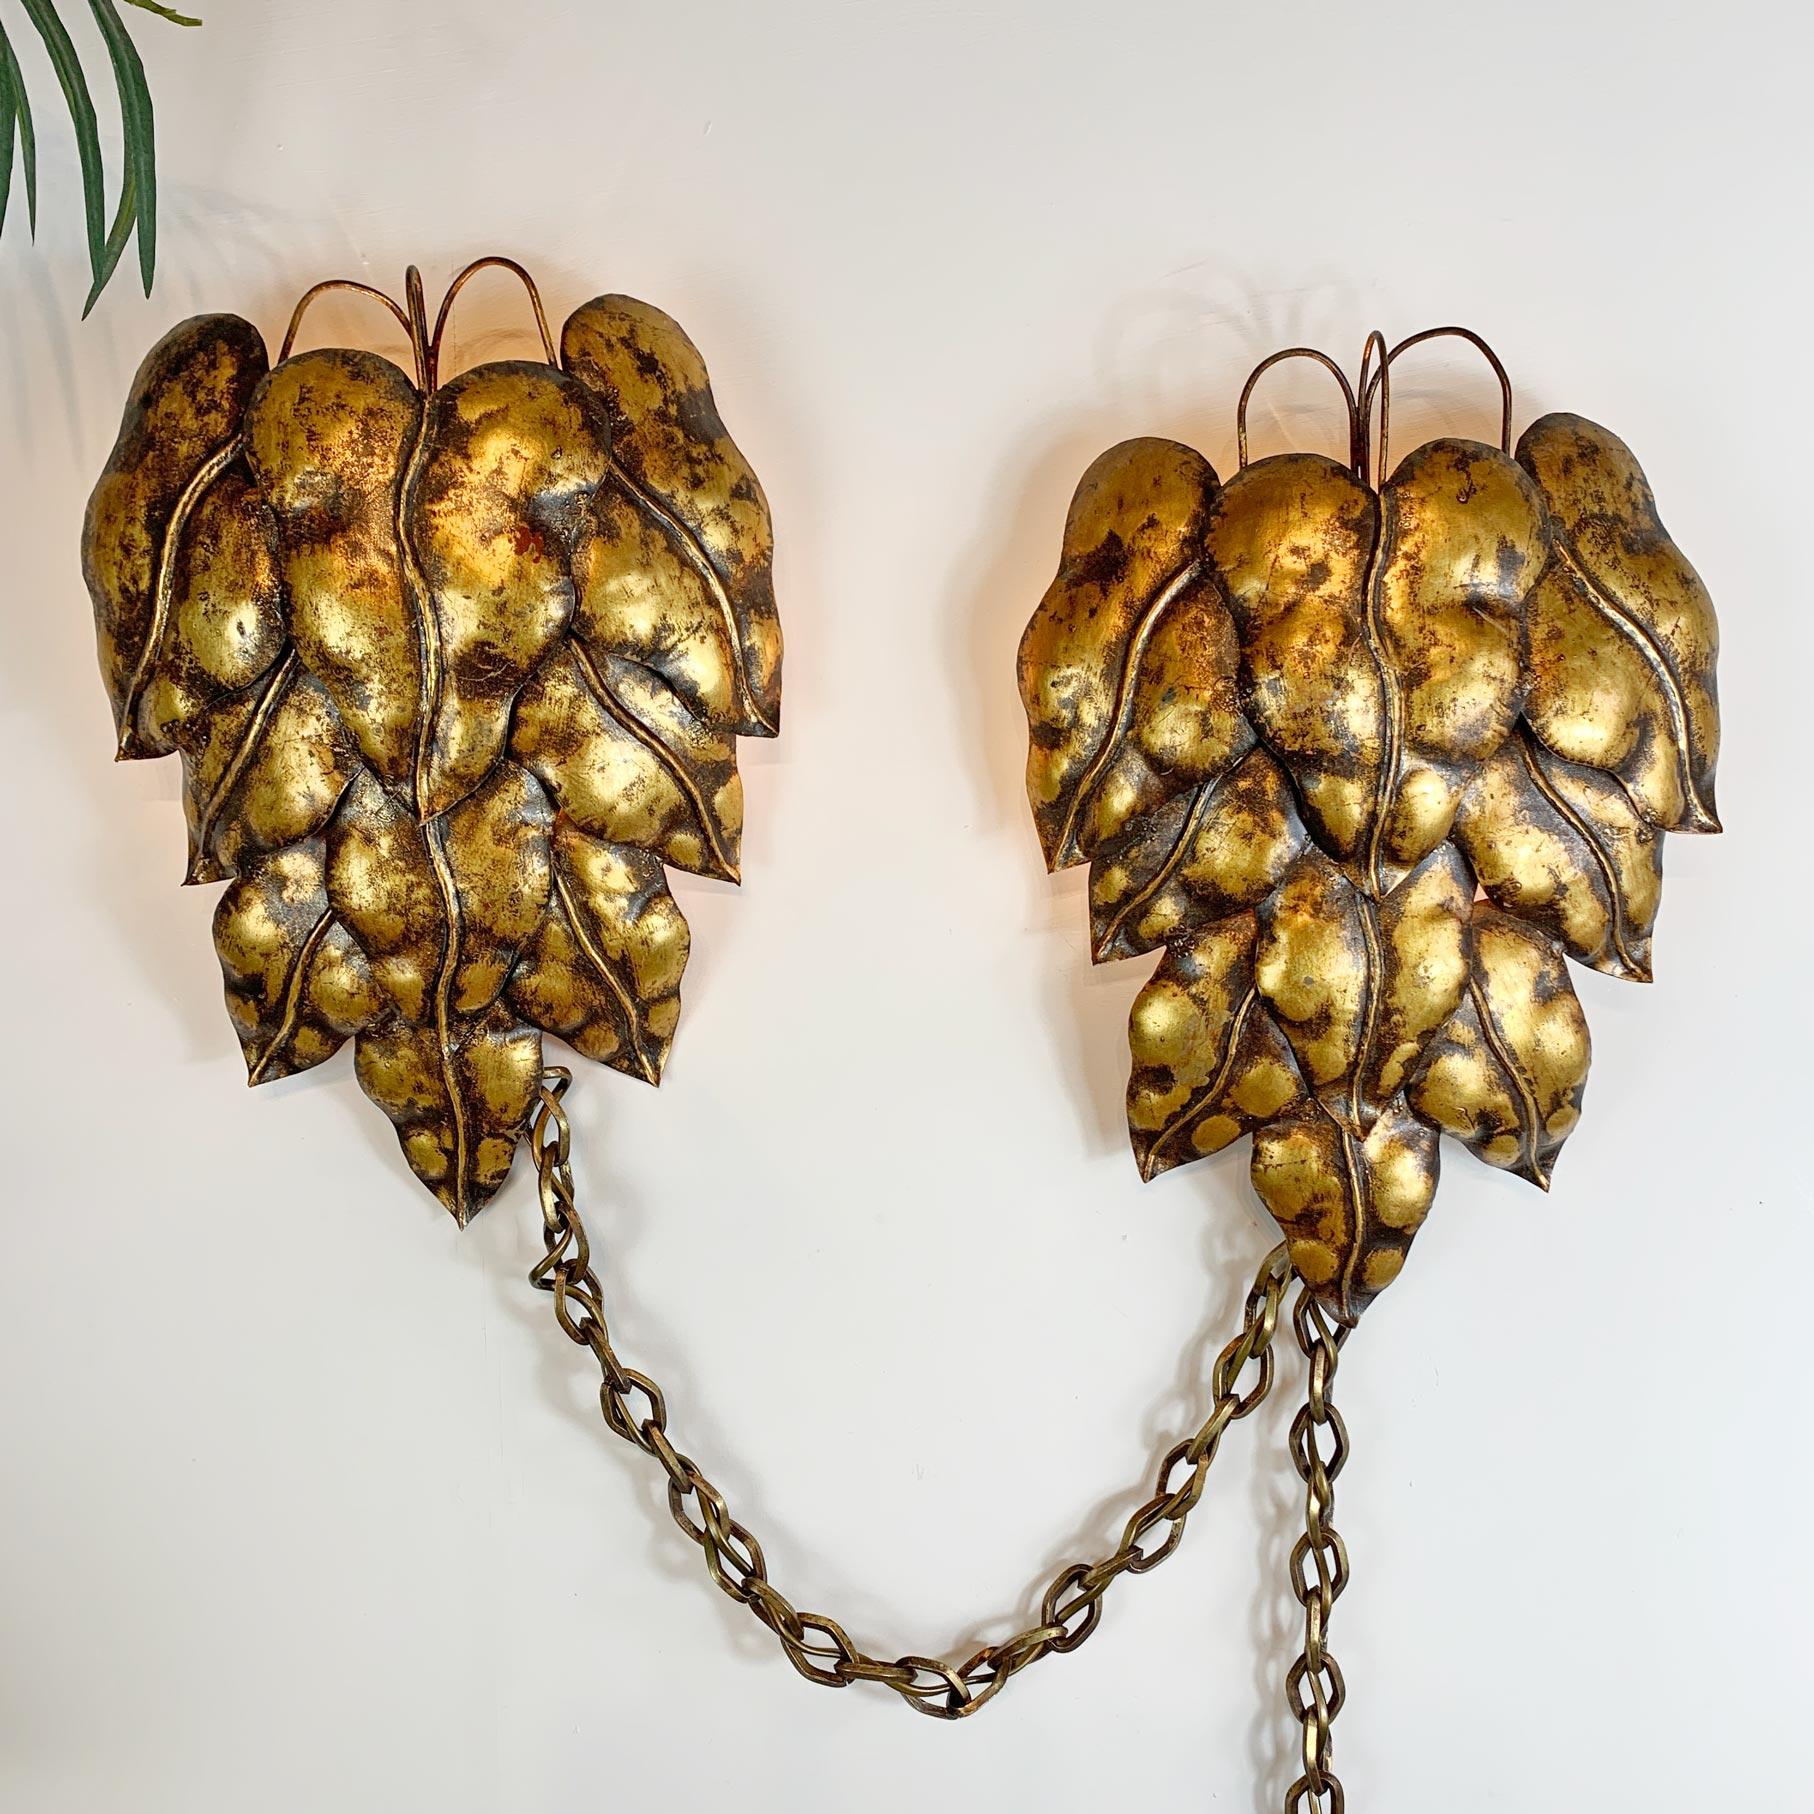 Pair of Gold Italian Leaf and Chain Swag Wall Lights, 1950's For Sale 4